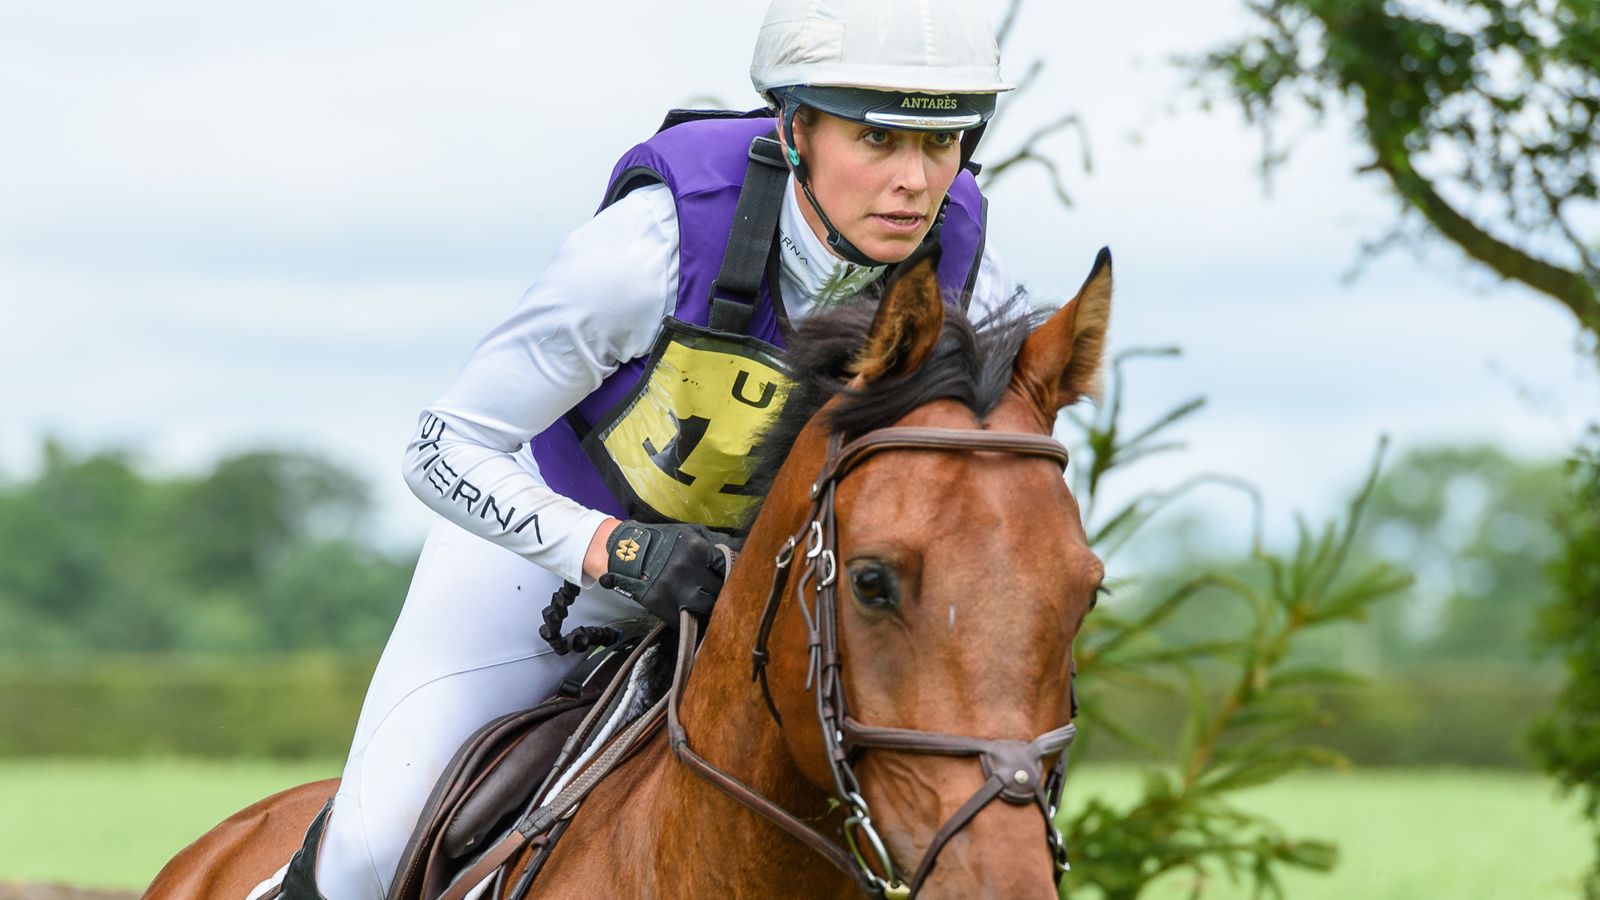 Georgie Campbell: British horse rider dies after fall at equestrian event